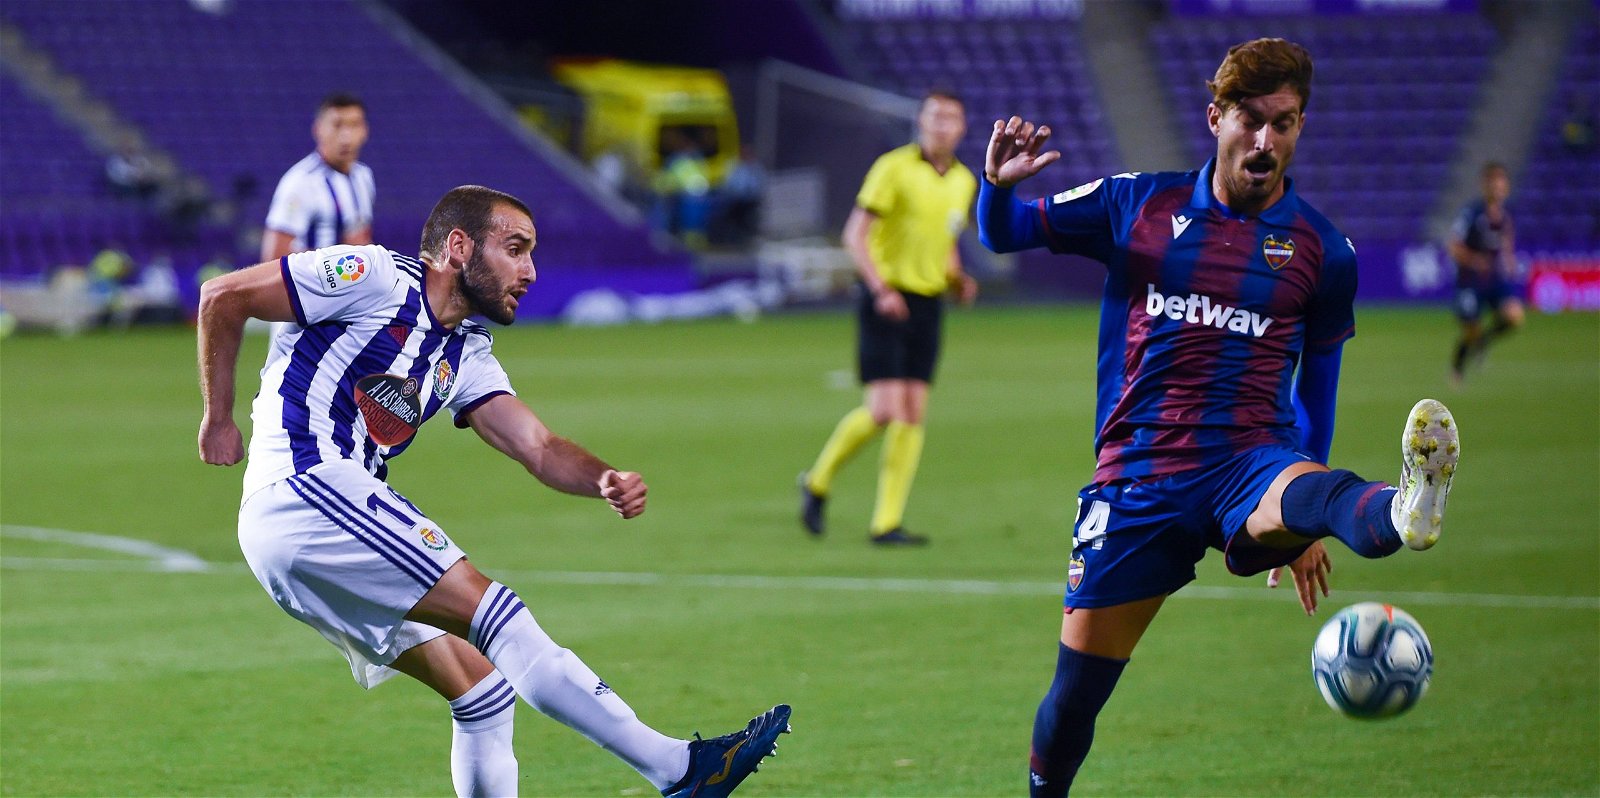 Leeds United rumour, Leeds United one of four top-tier clubs interested in £18m Levante midfielder